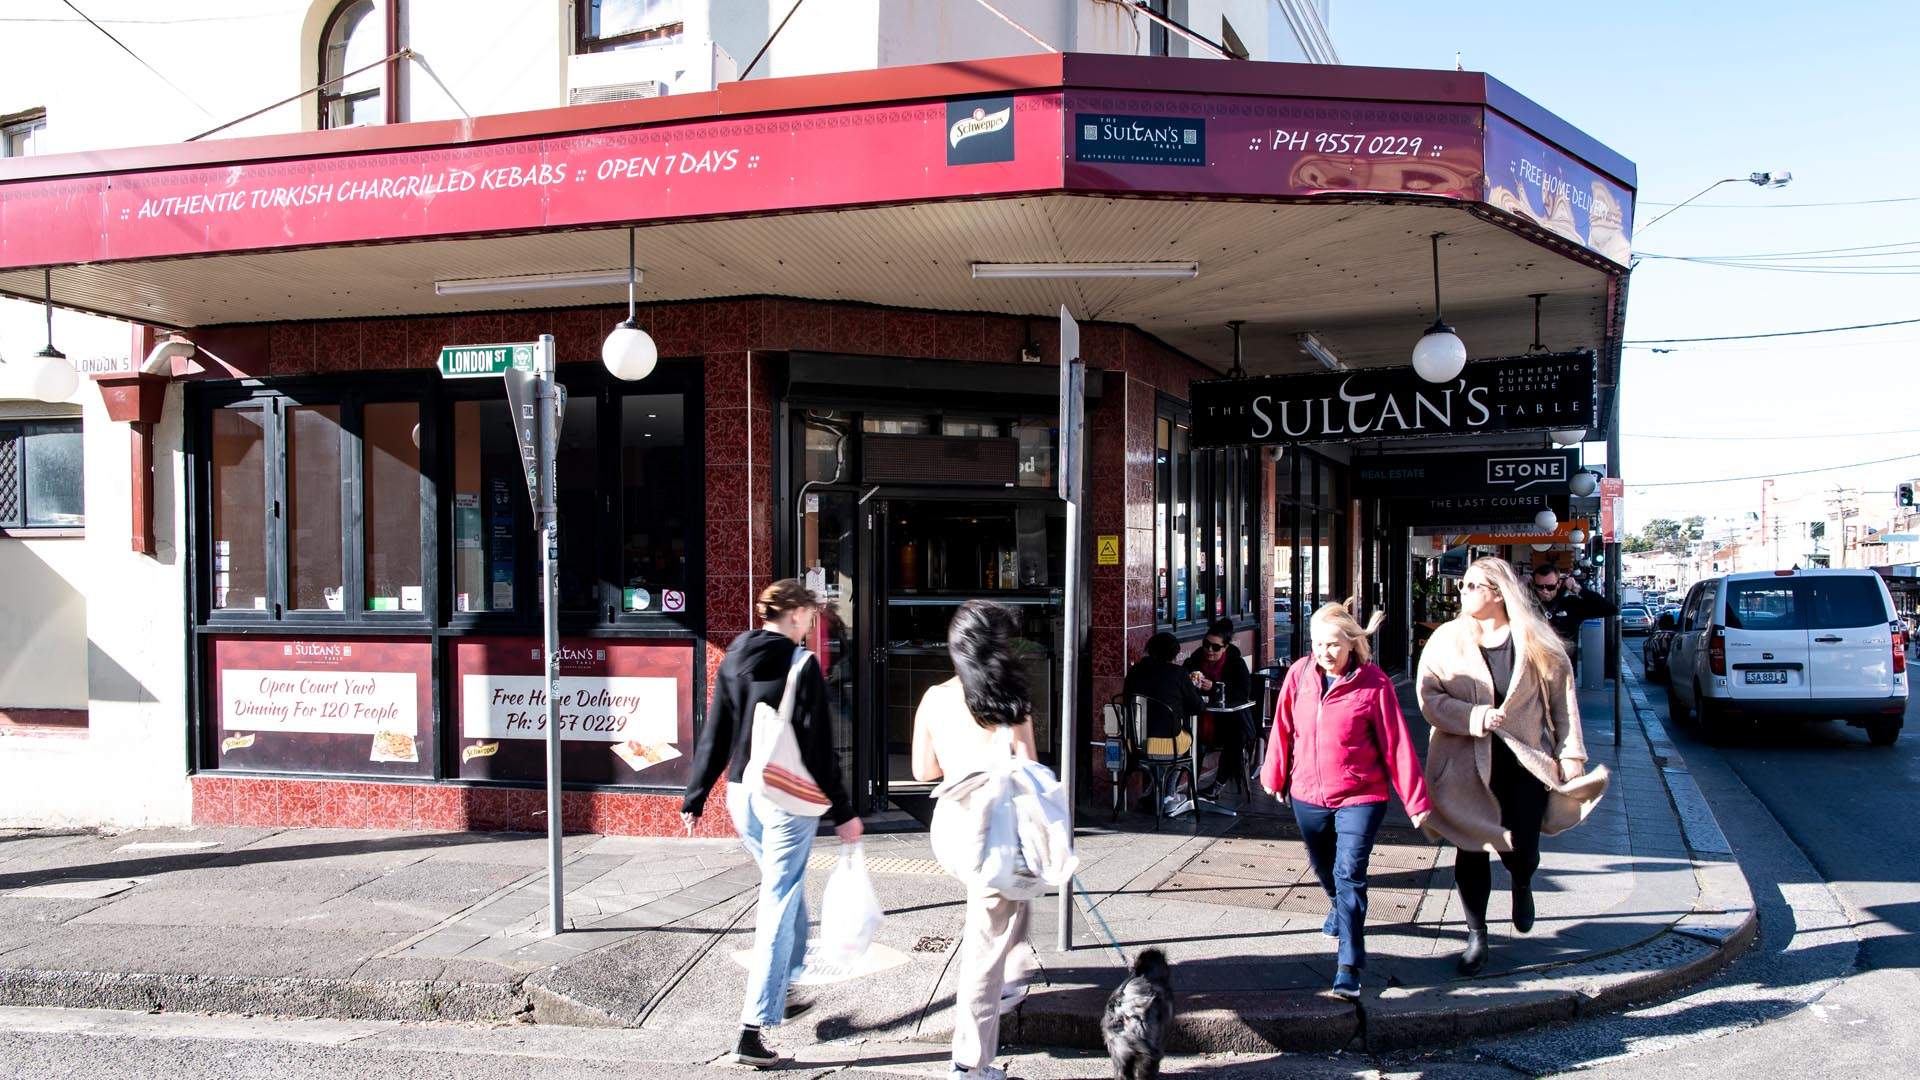 The Sultan's Table - one of the best BYO restaurants in Sydney